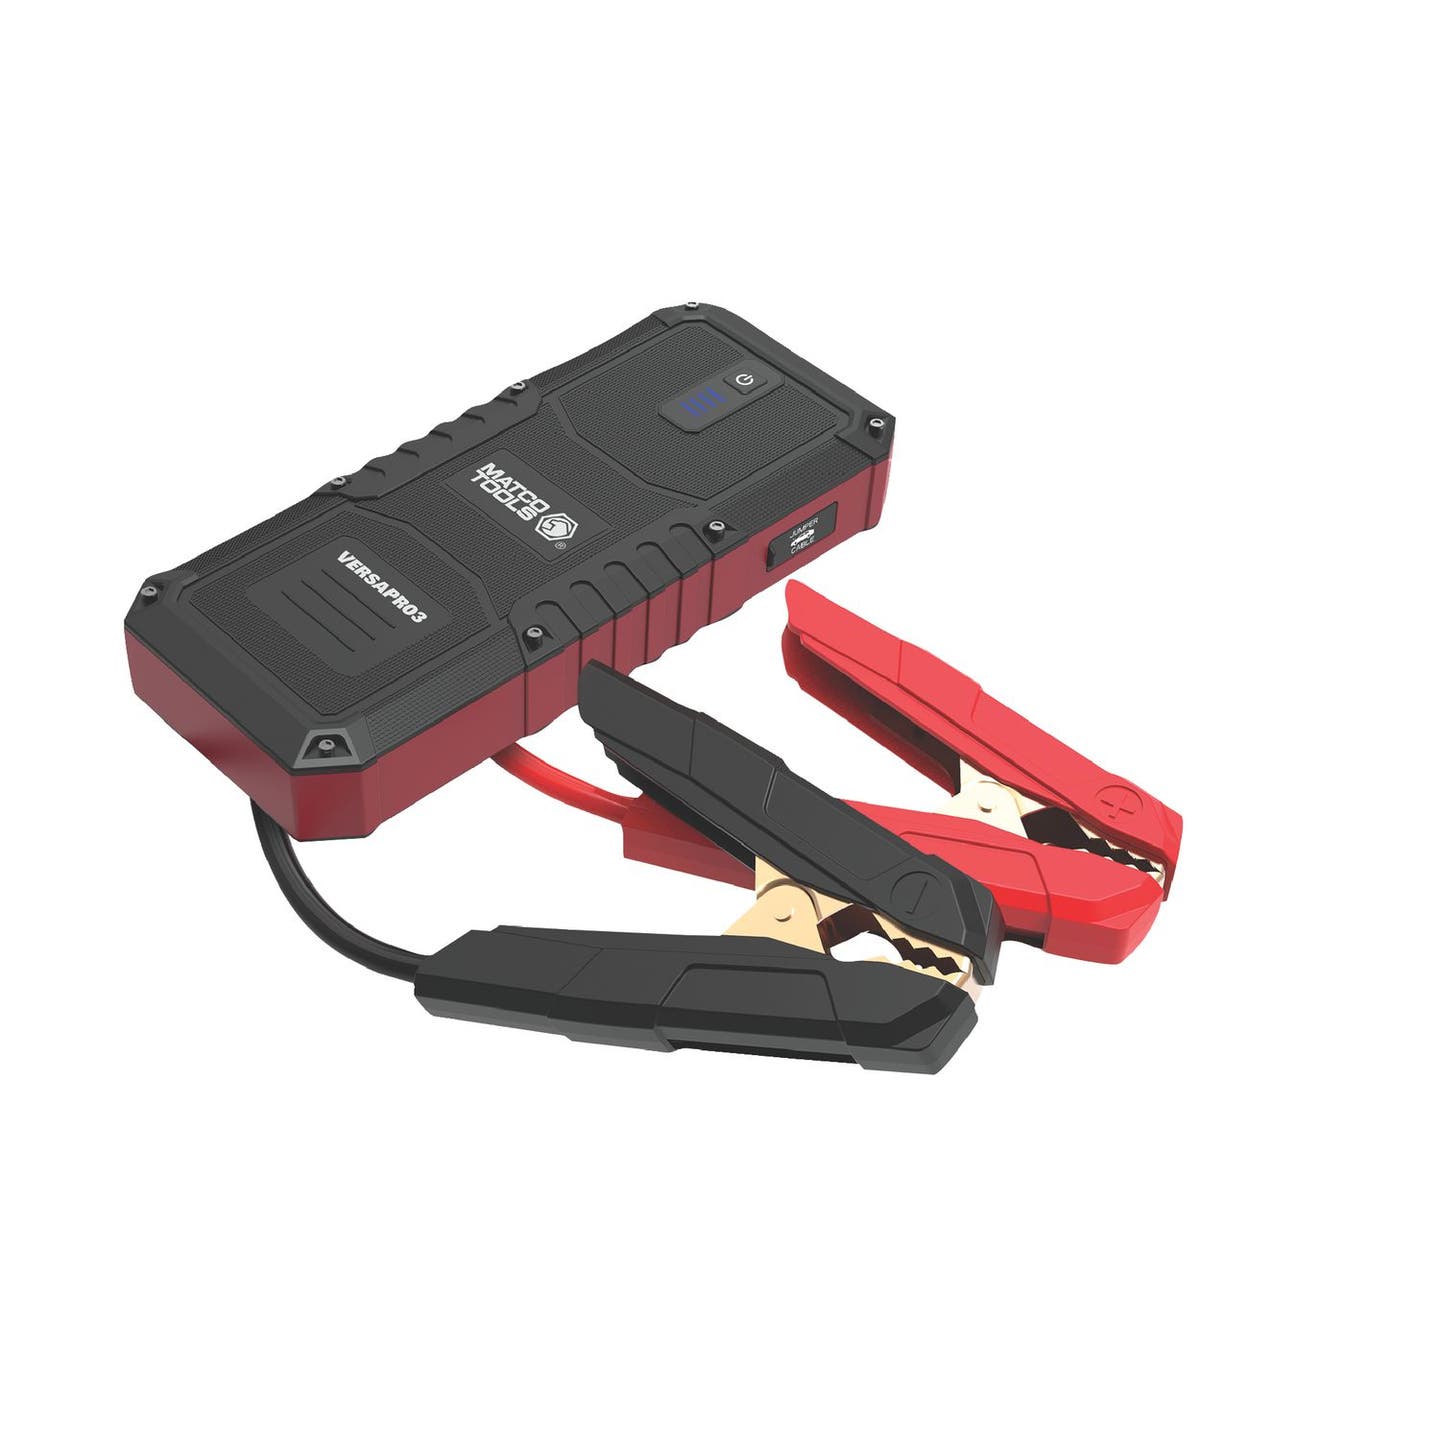 3,000 AMP PORTABLE POWER SOURCE WITH JUMP START FUNCTION